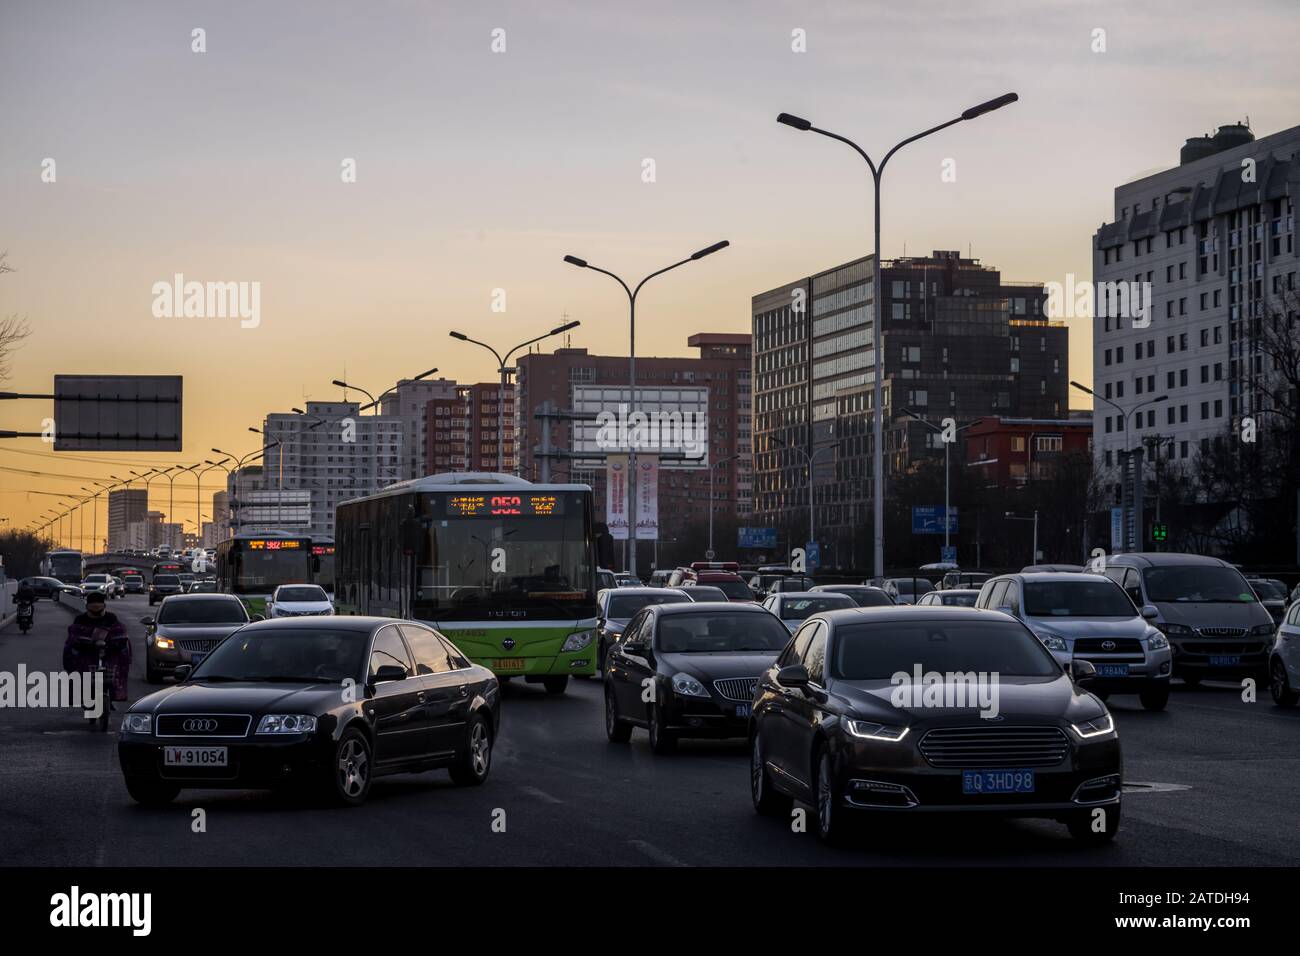 Beijing, China - December 28 2018: Deep view of a heavy traffic jam in Beijing, a smog covered city, when the smog alert went to orange, 'hazardous'. Stock Photo